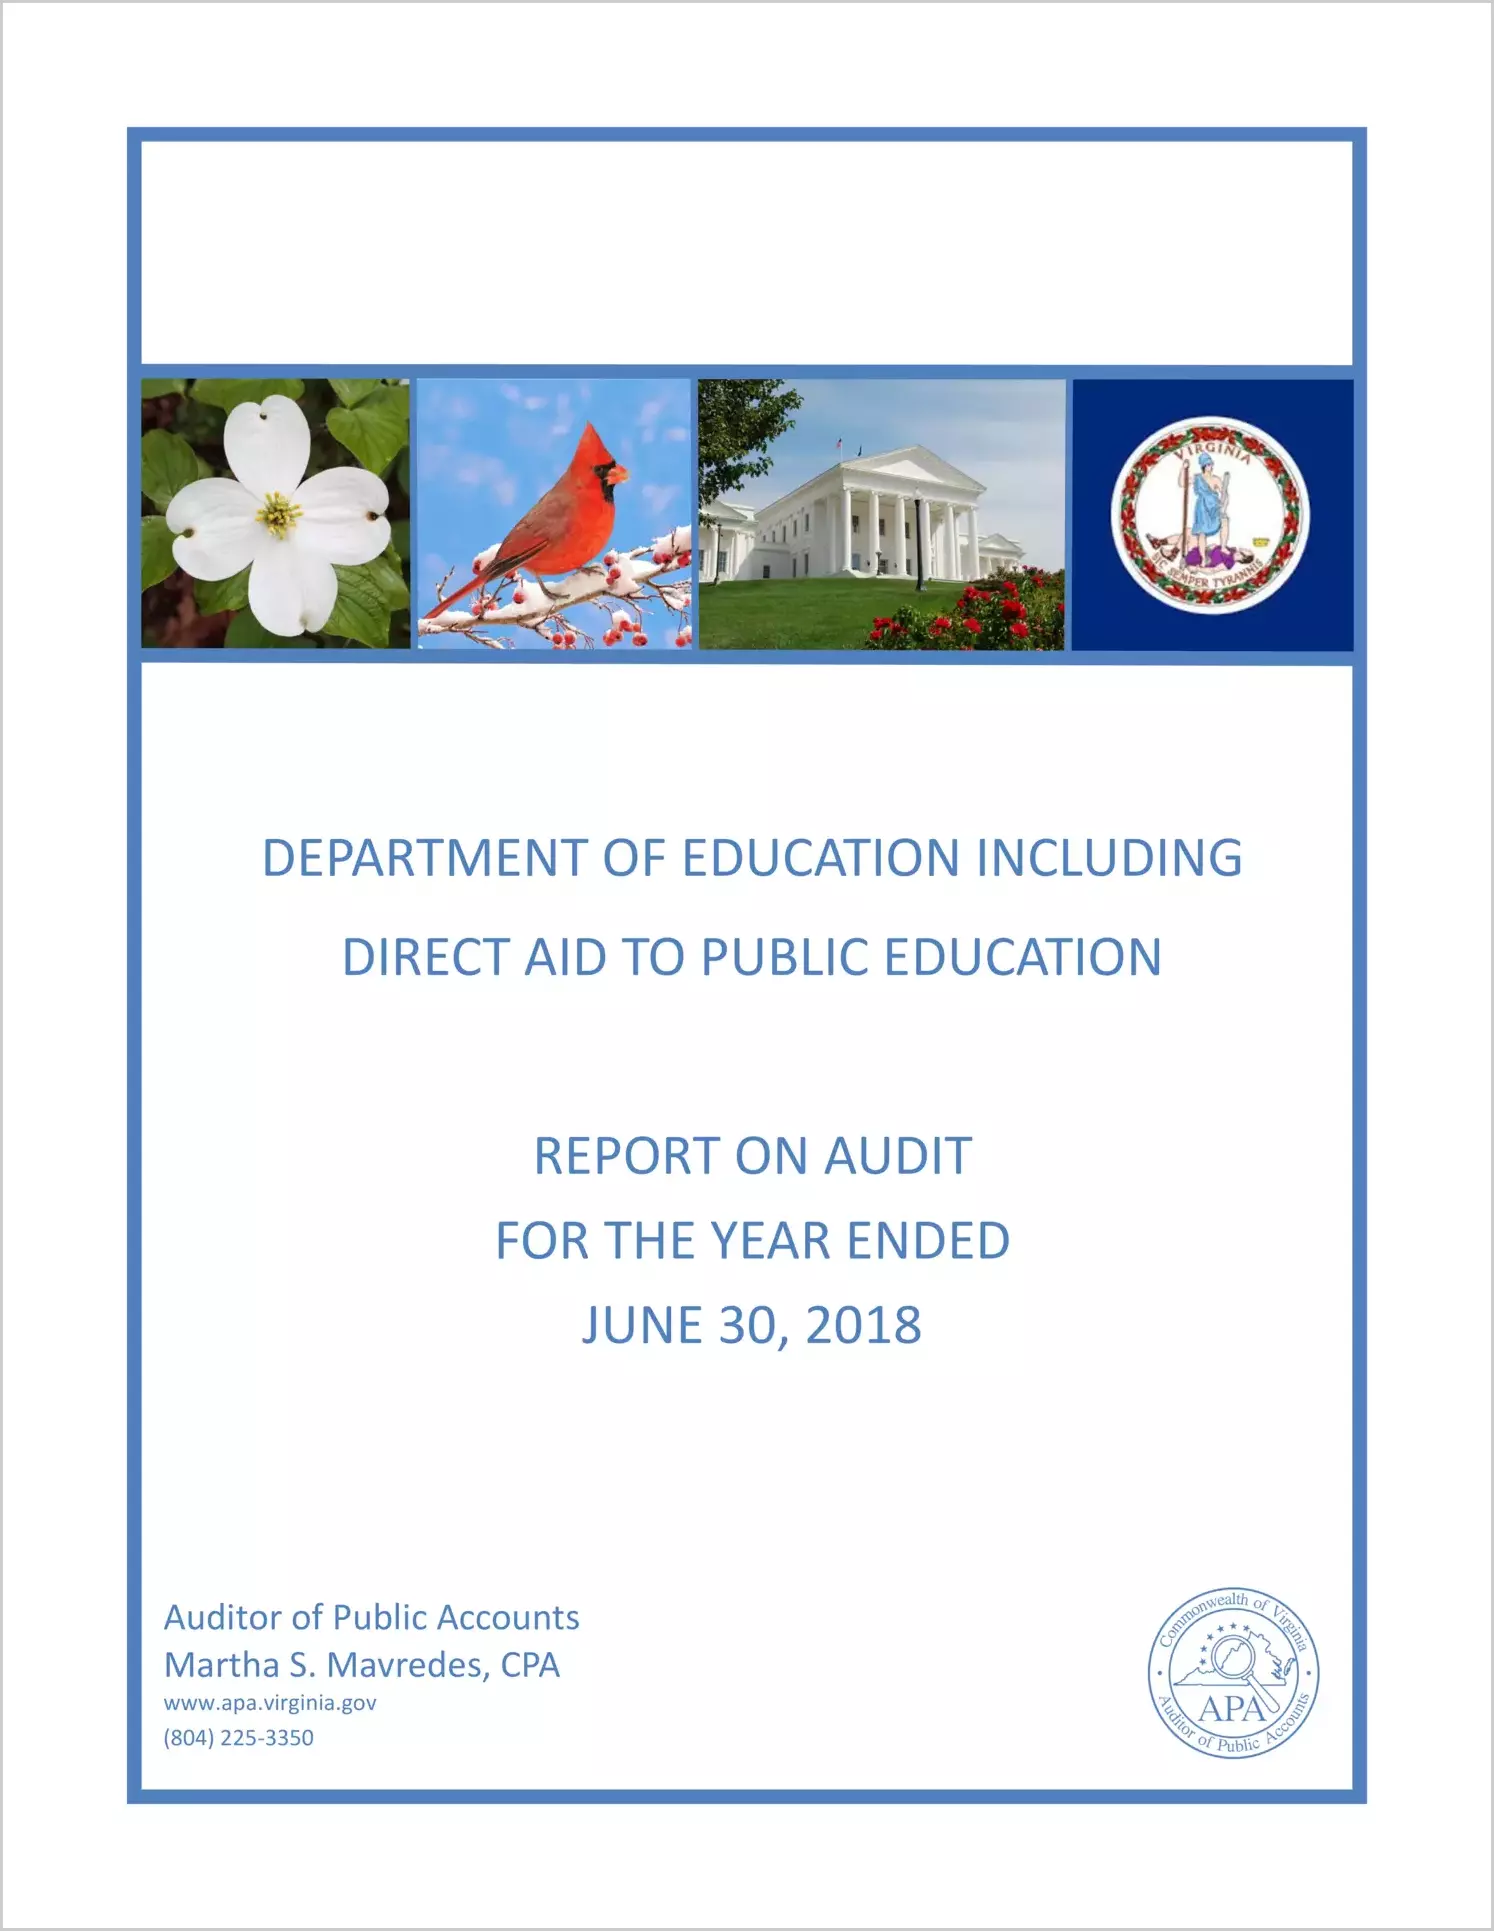 Department of Education including Direct Aid to Public Education for the year ended June 30, 2018